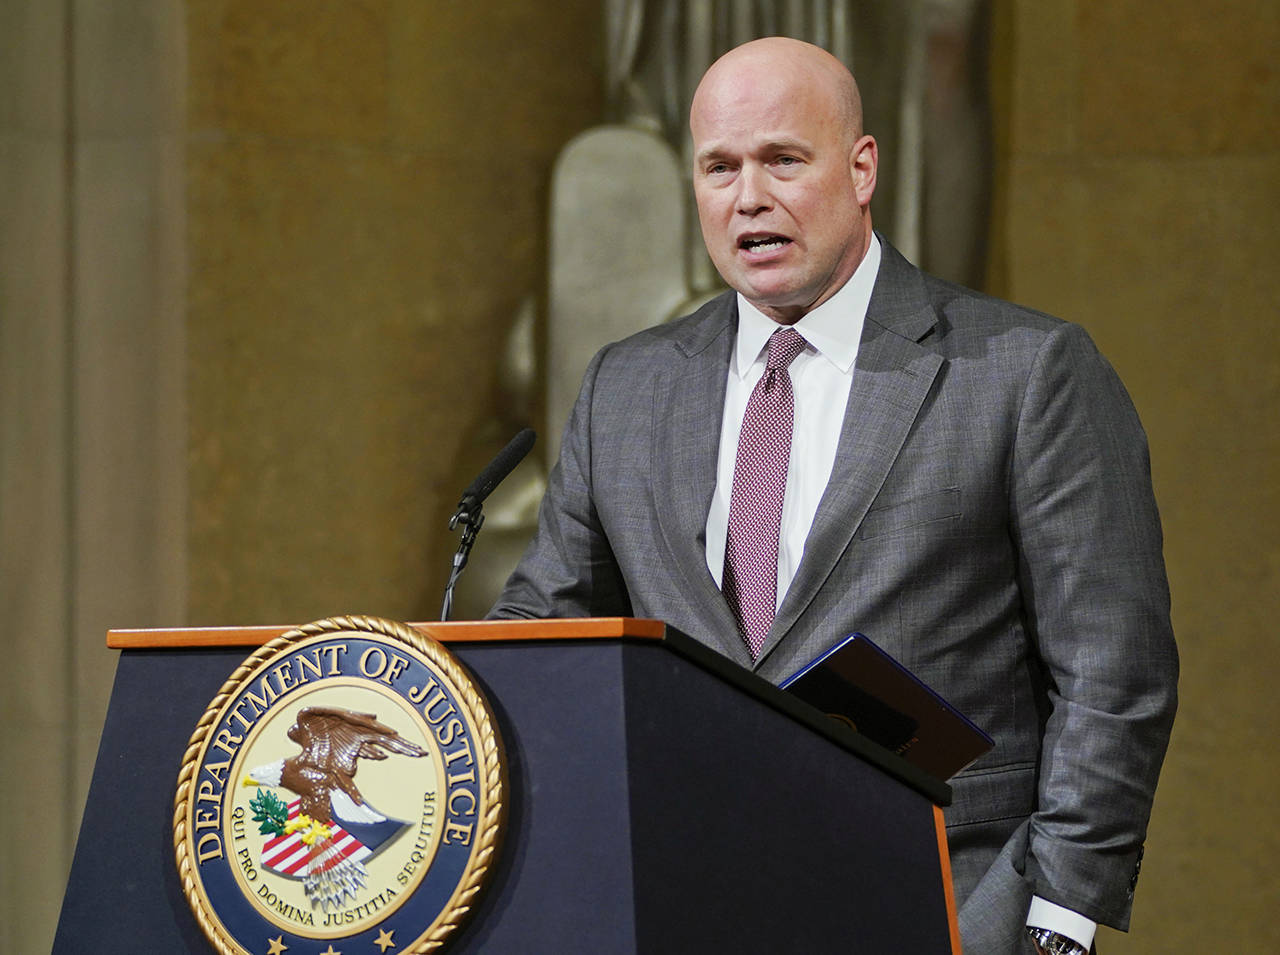 Acting Attorney General Matthew Whitaker speaks at the Department of Justice’s annual Veterans Appreciation Day ceremony Thursday in Washington. (AP Photo/Pablo Martinez Monsivais)